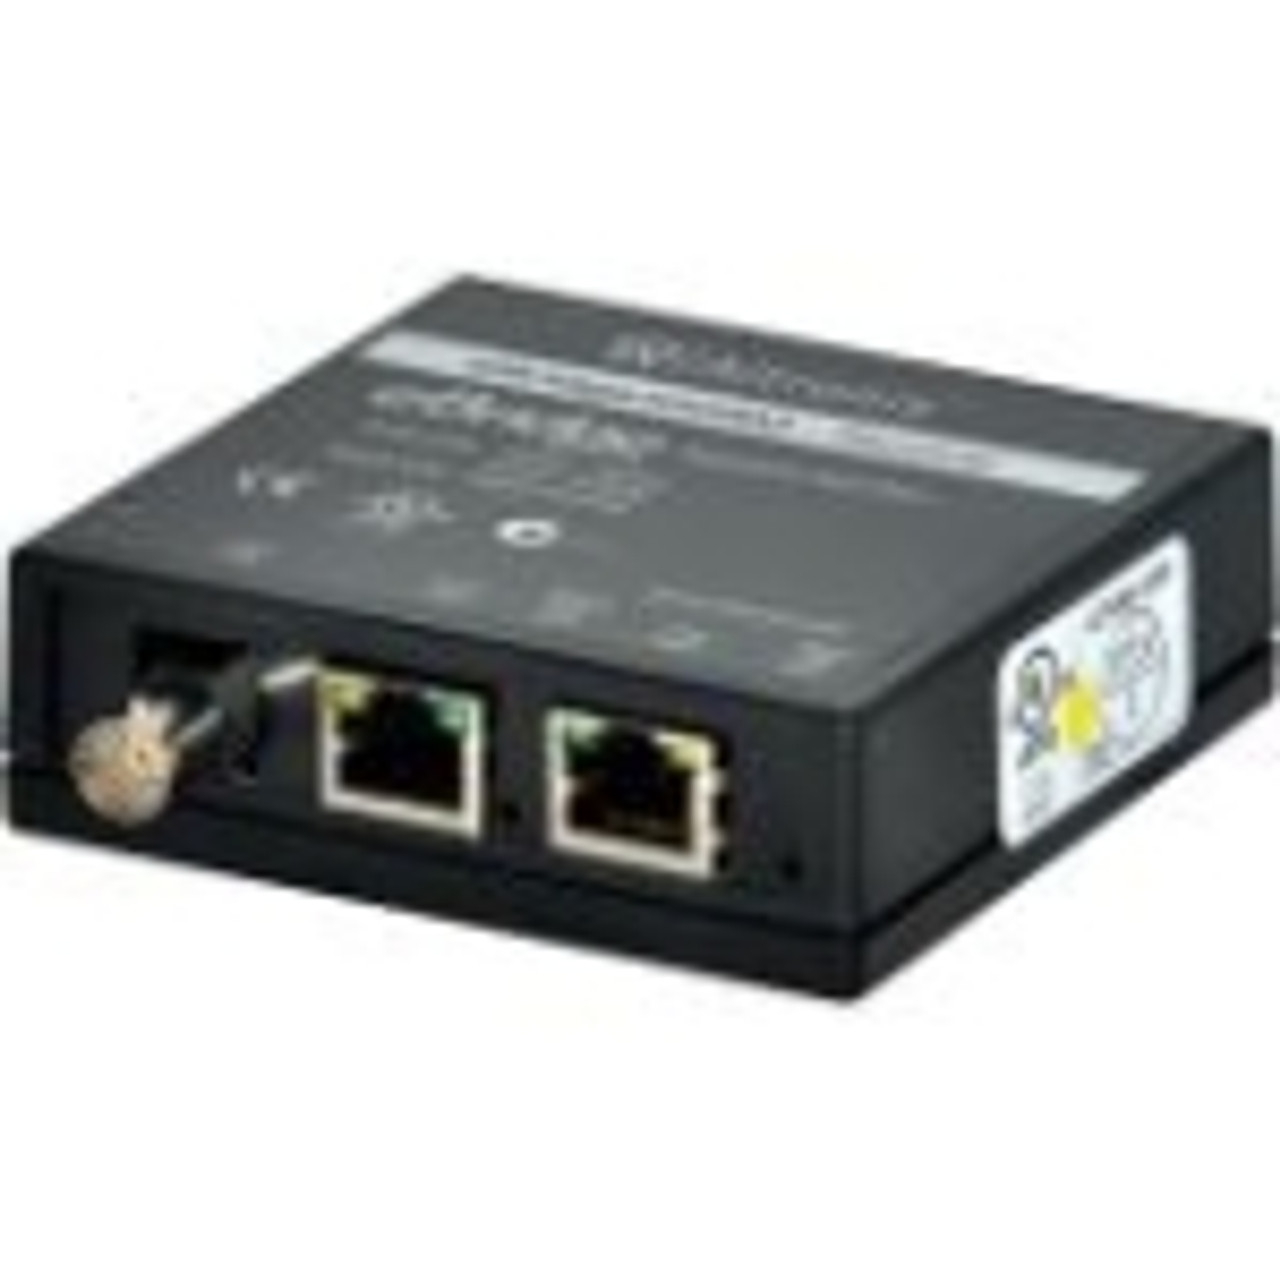 EBRIDGE100RM Altronix IP and PoE+ over Coax or Extended Ethernet Cable Receiver Network (RJ-45) 2x PoE+ (RJ-45) Ports Fast Ethernet 10/100Base-TX